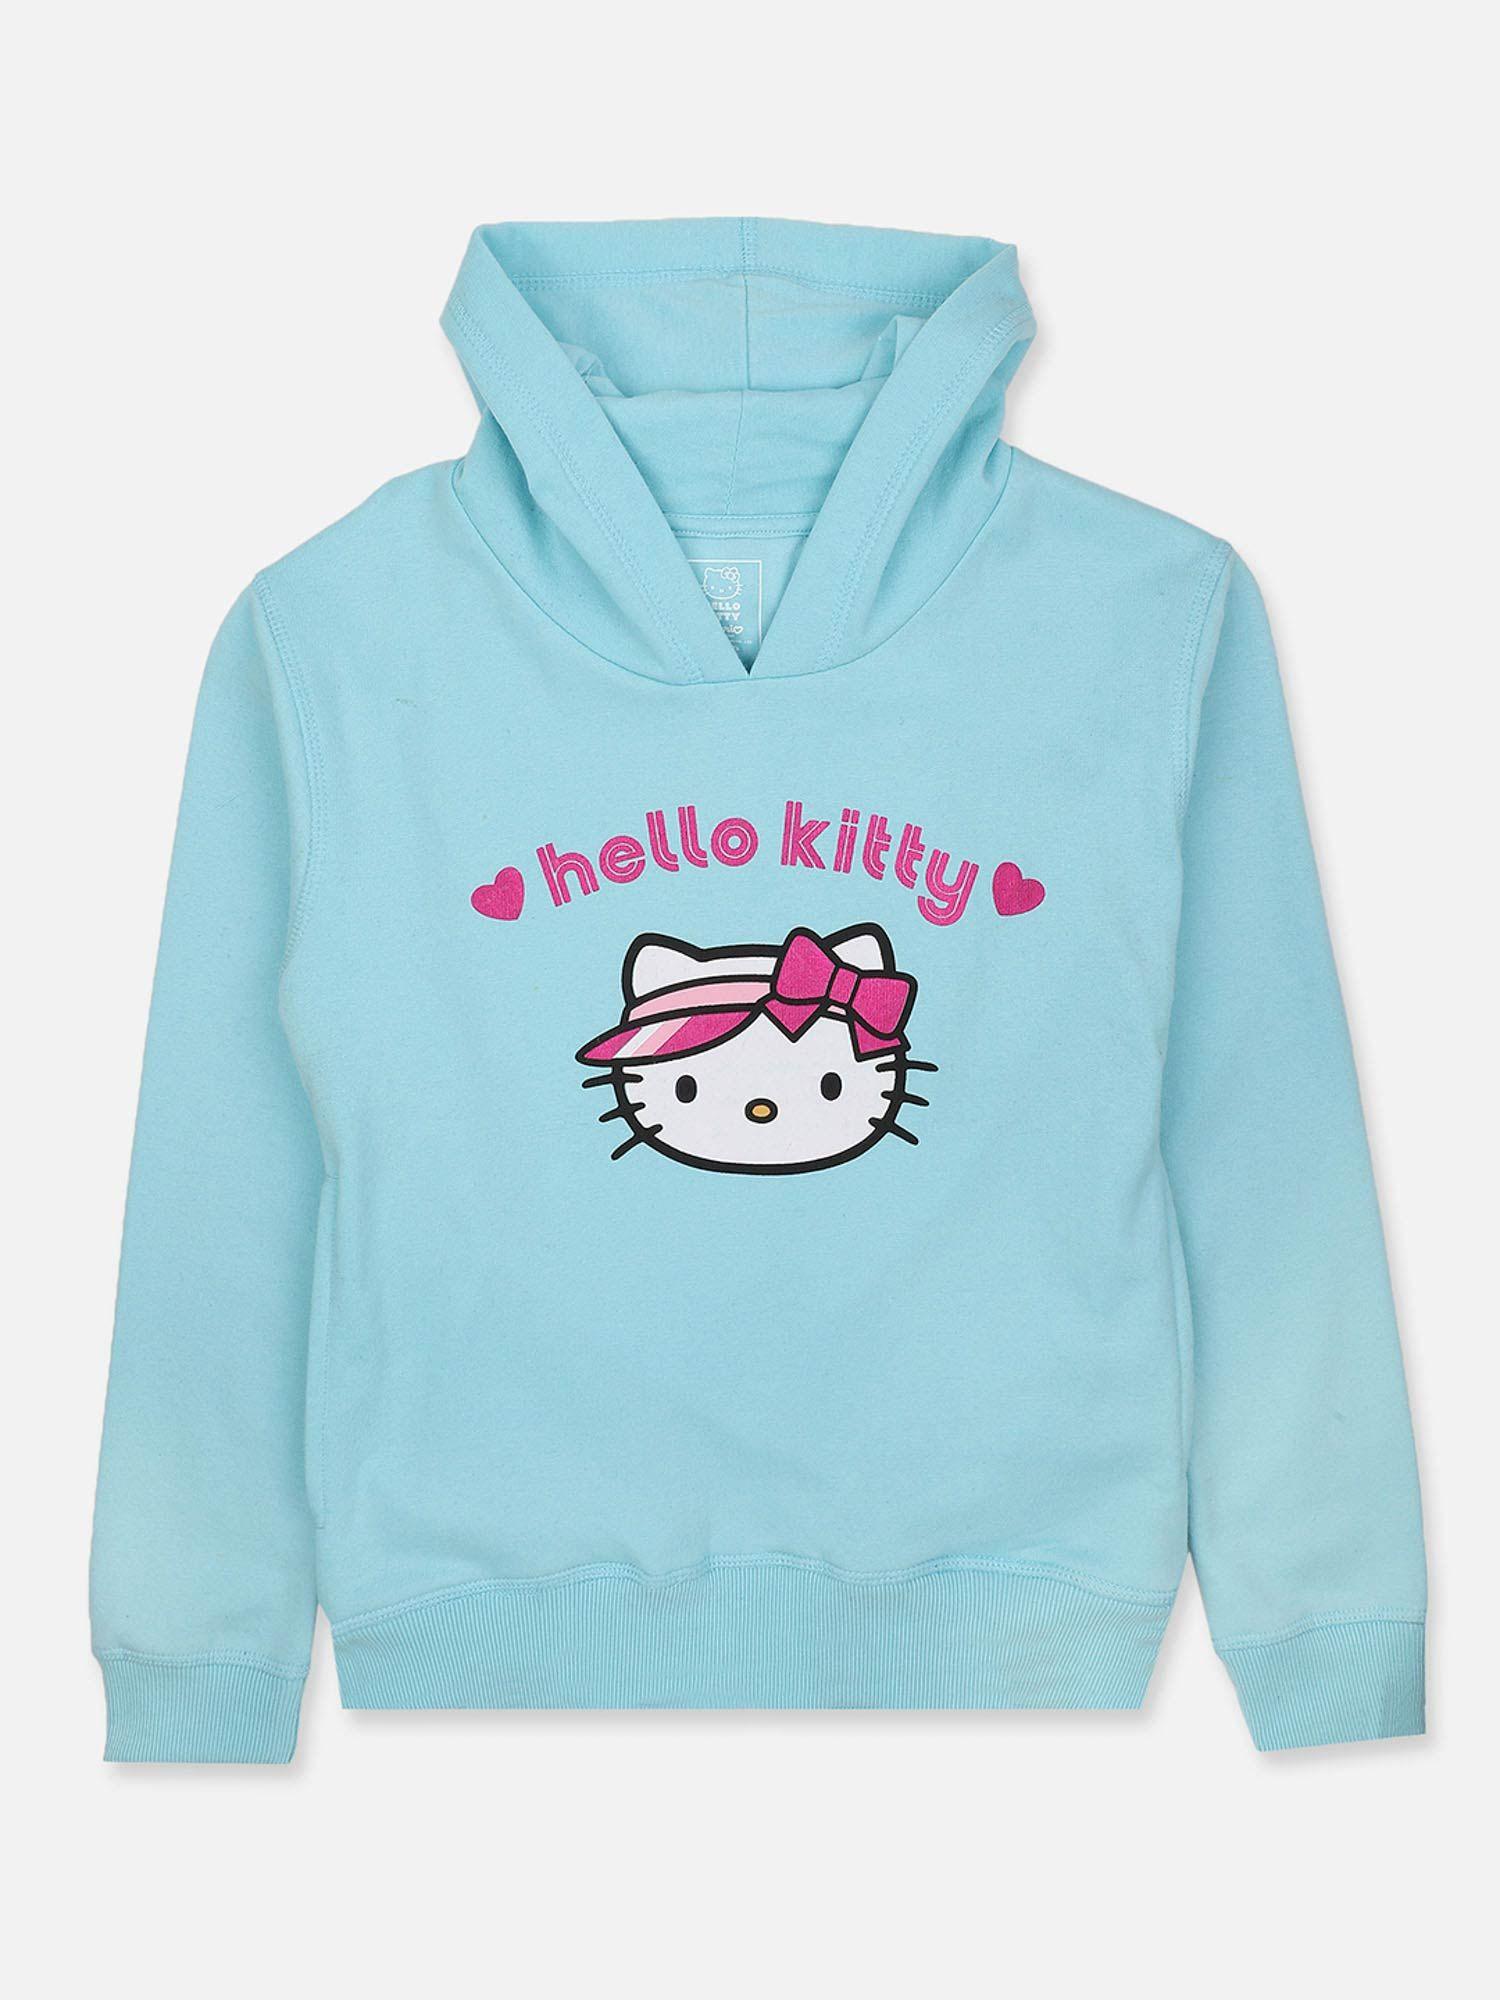 hello kitty featured hoodie for girls